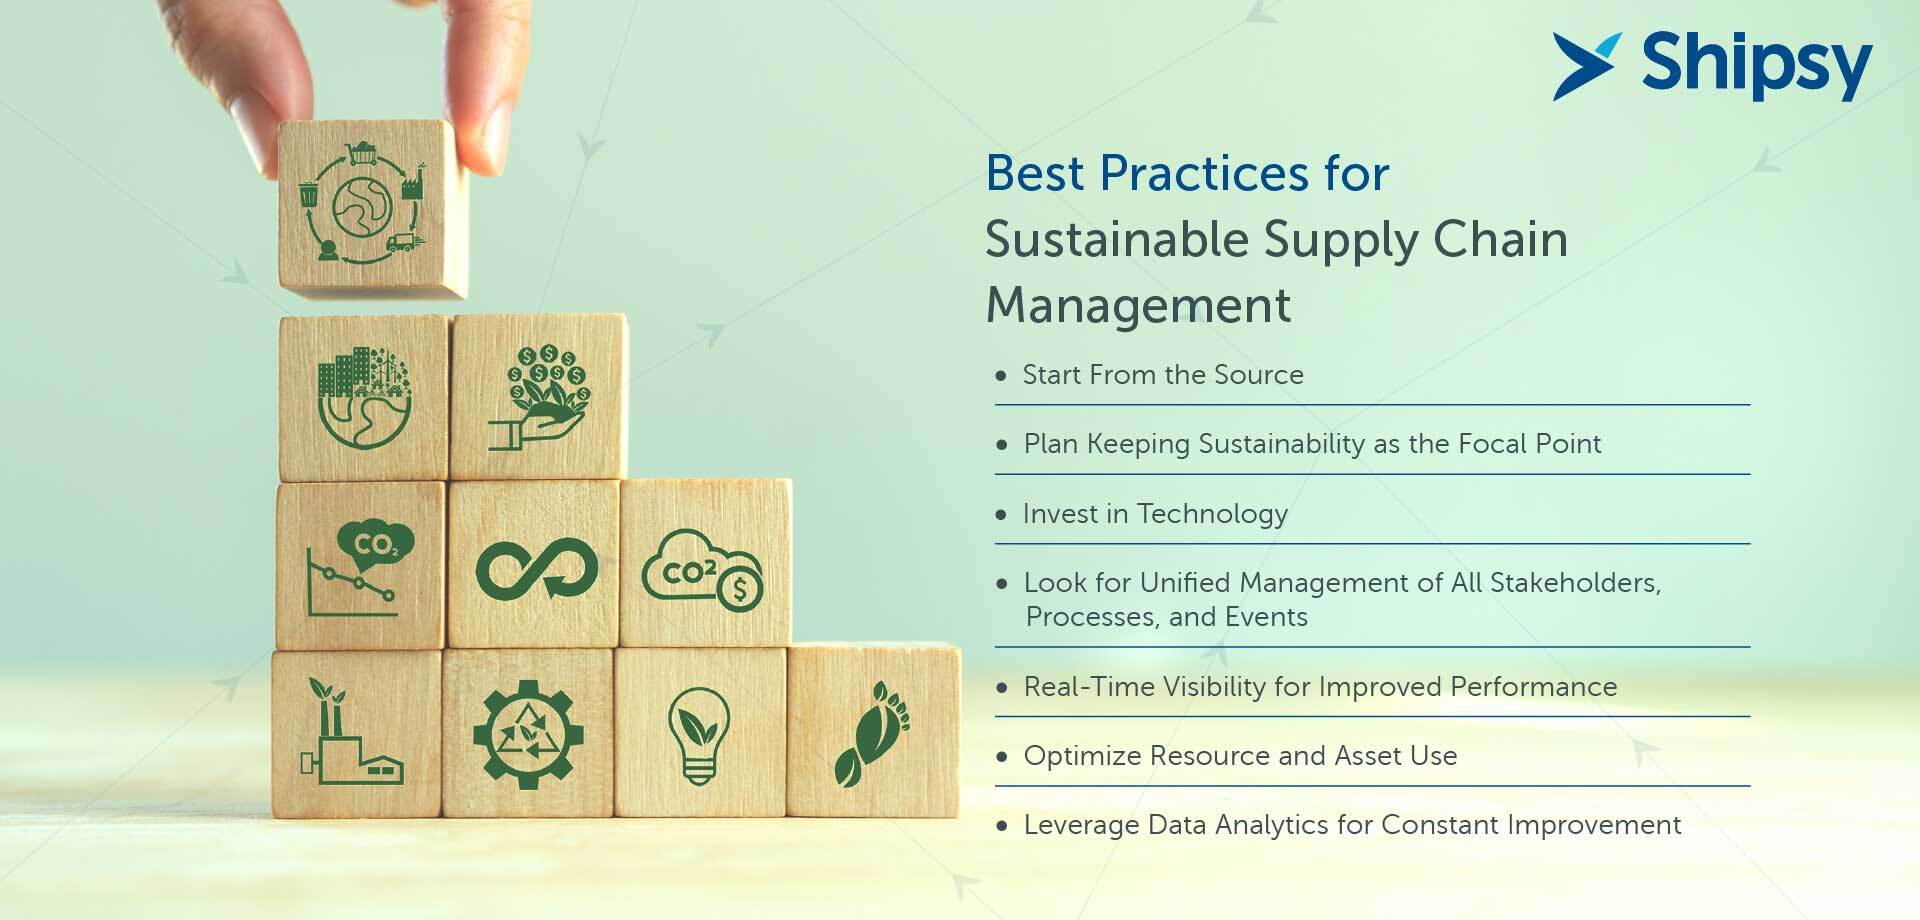 Best practices for sustainable supply chain management